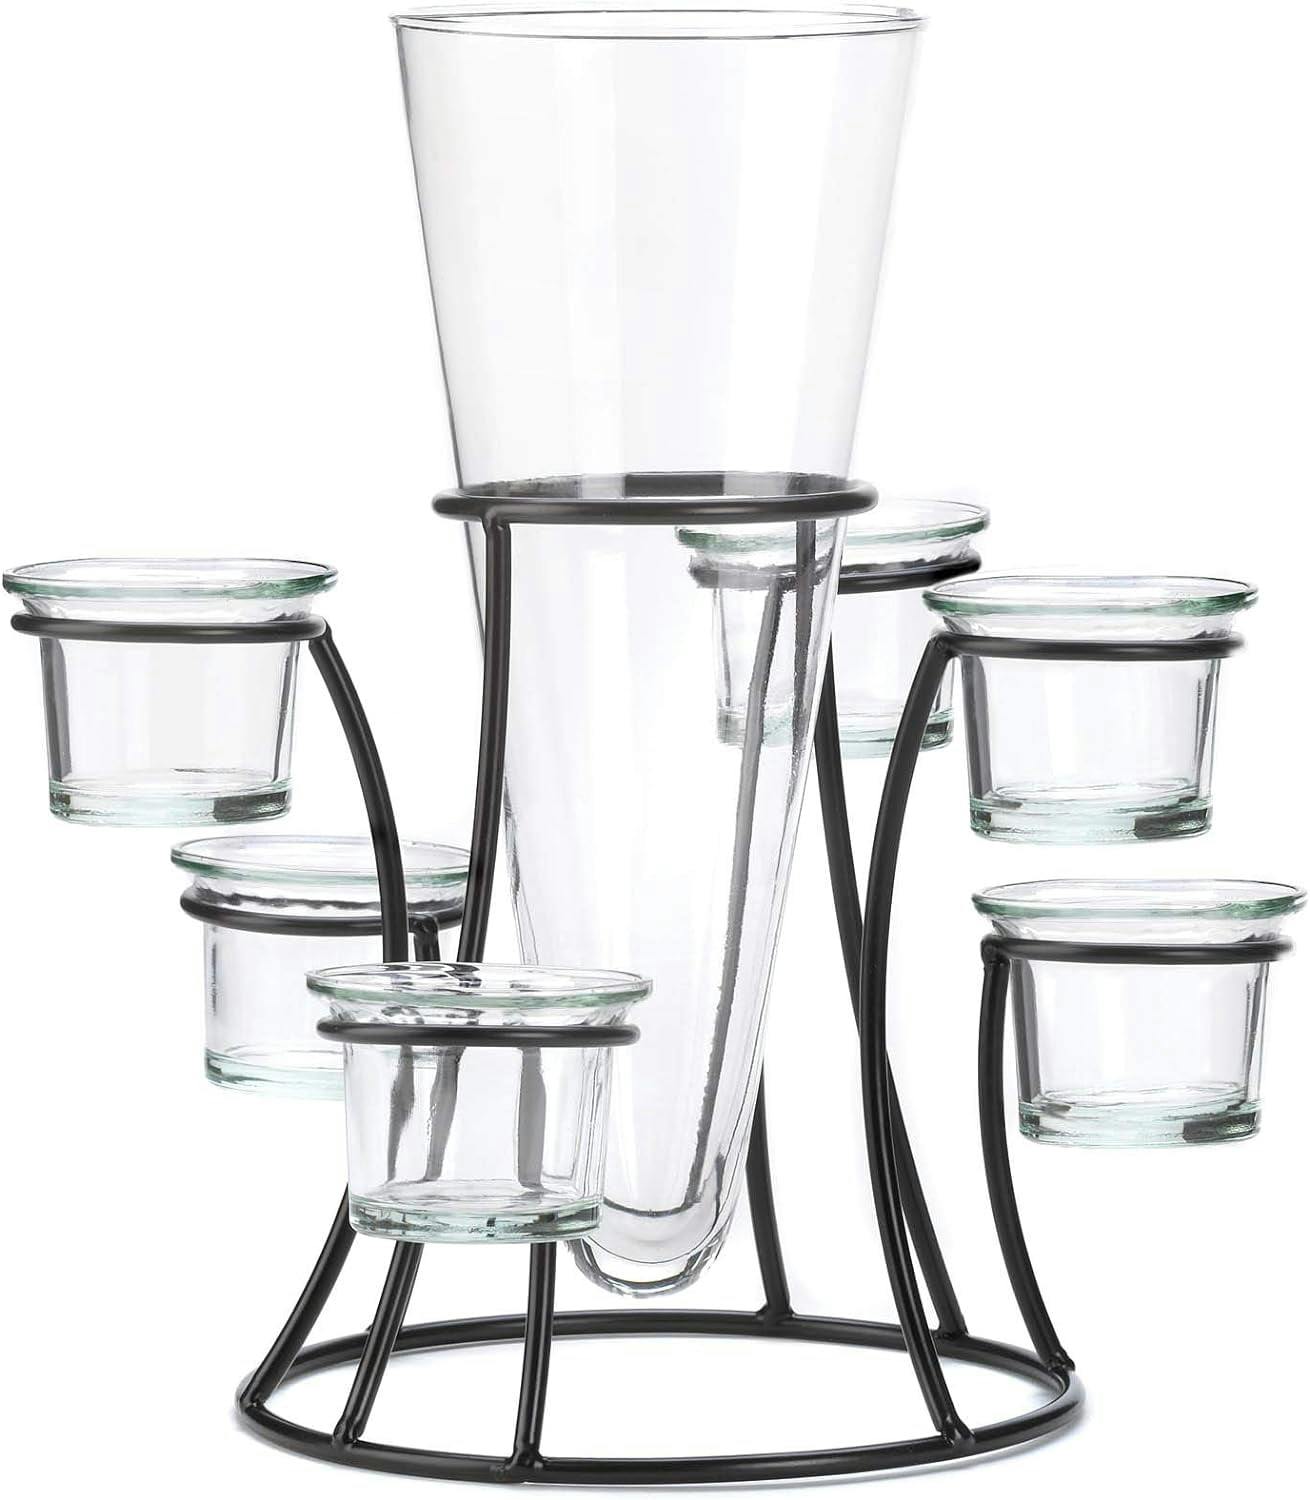 Elegant Winter Glow Circular Candle Stand with Glass Vase